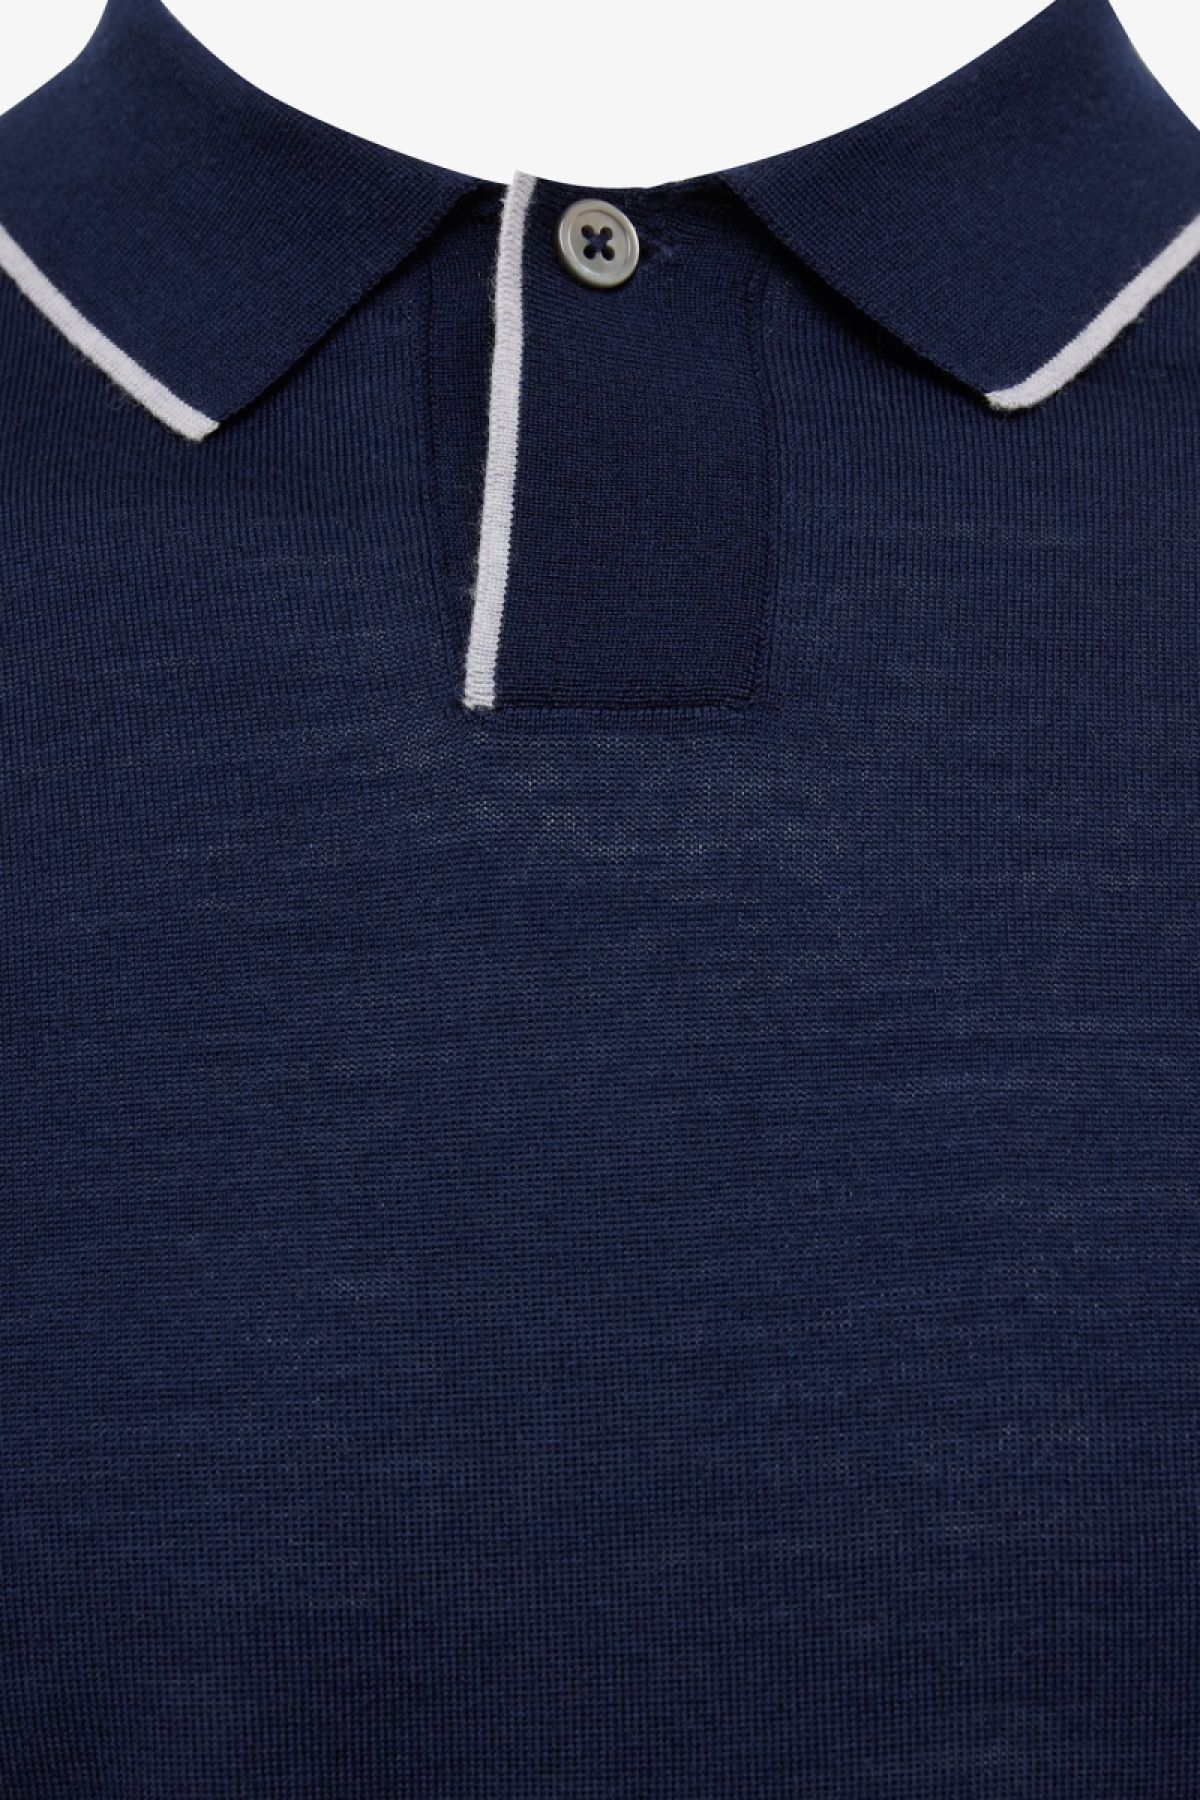 Gold polo 1 knoop donkerblauw